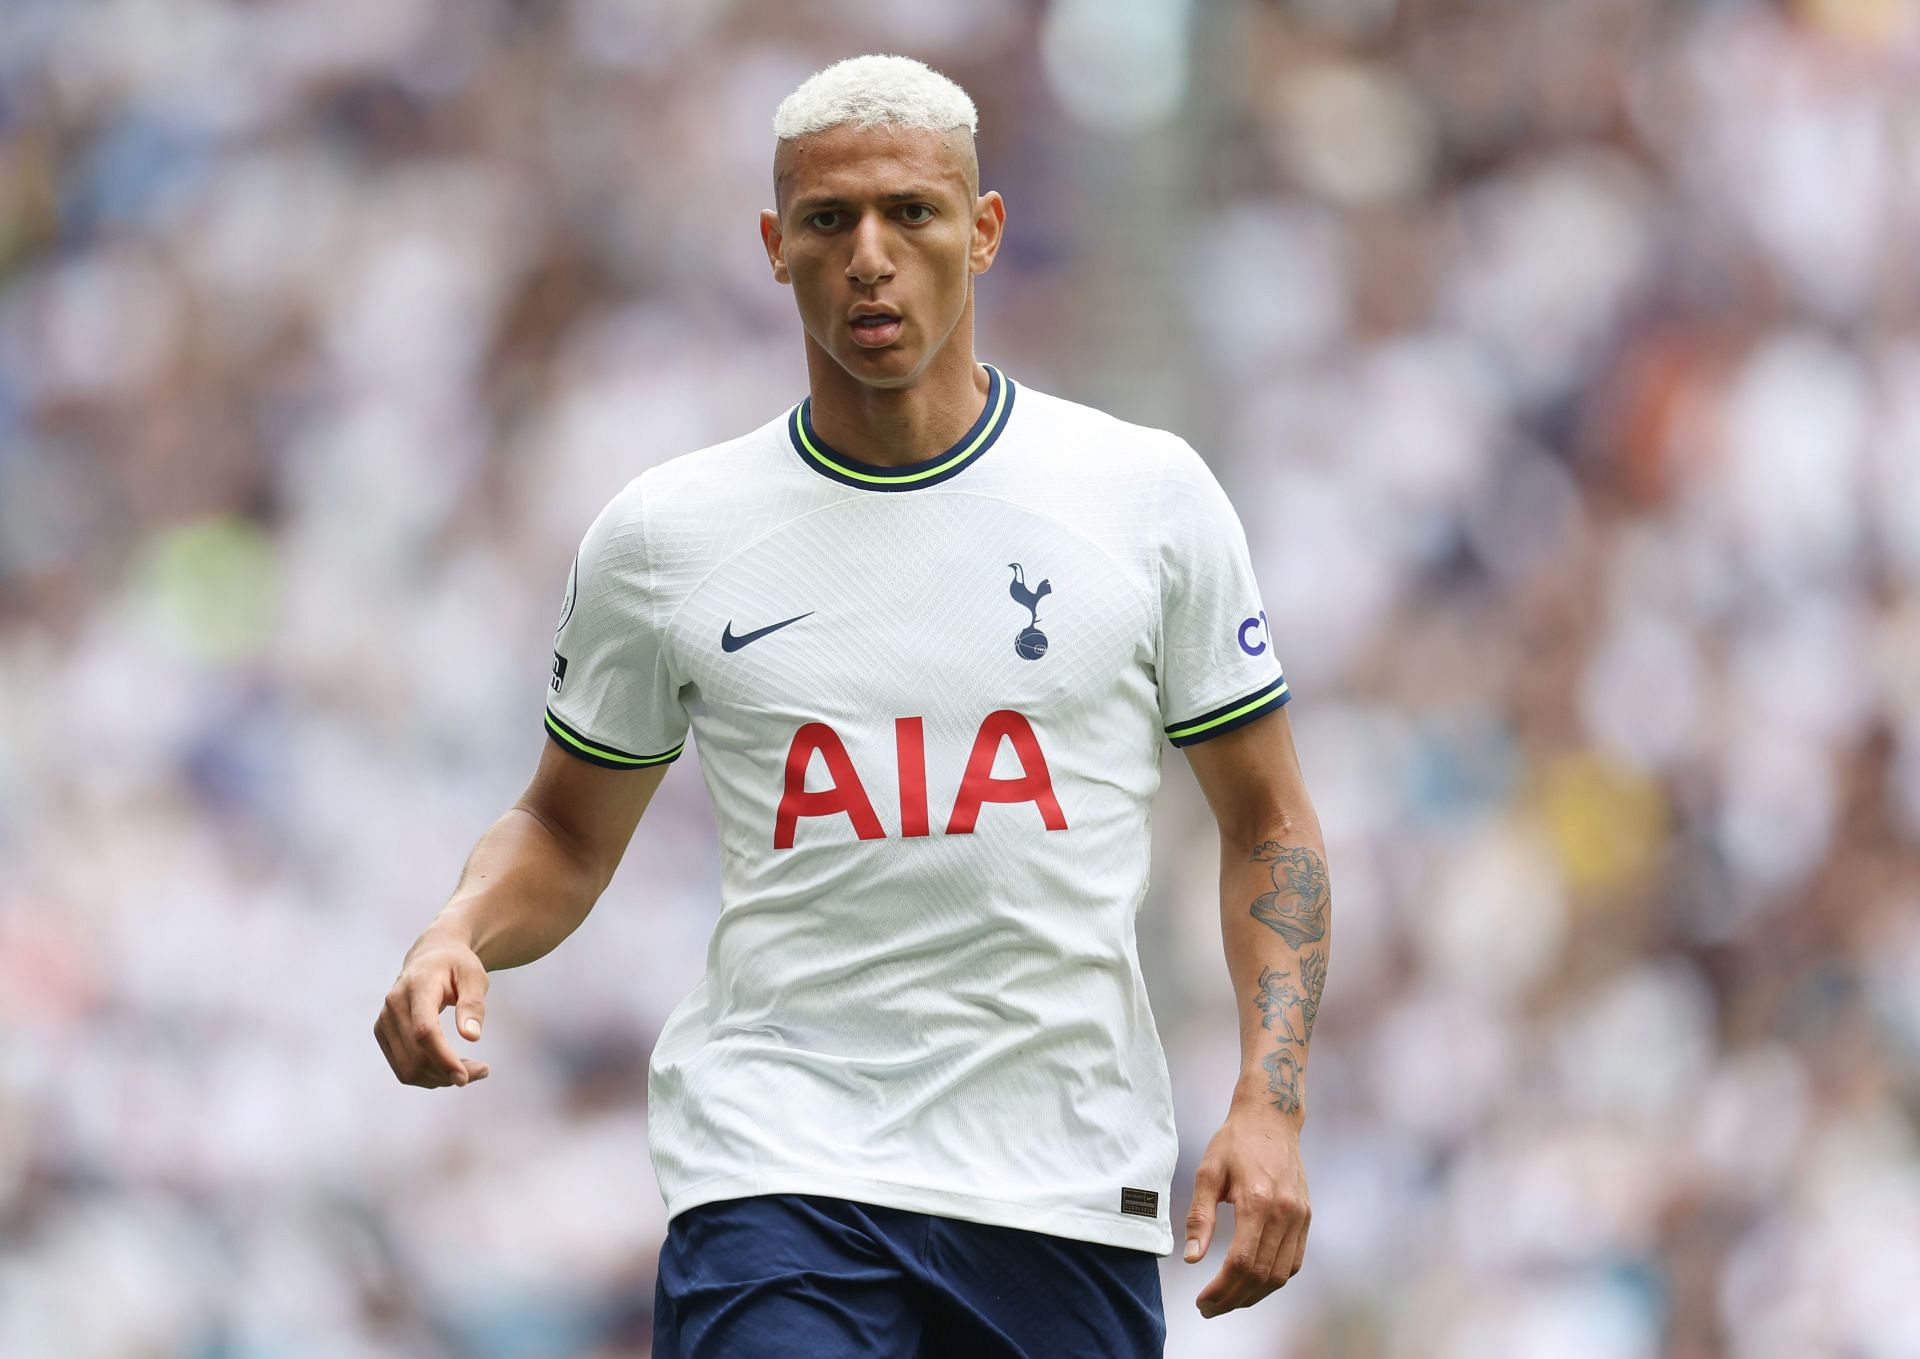 Richarlison has endured a bright start to his time at Tottenham Hotspur.